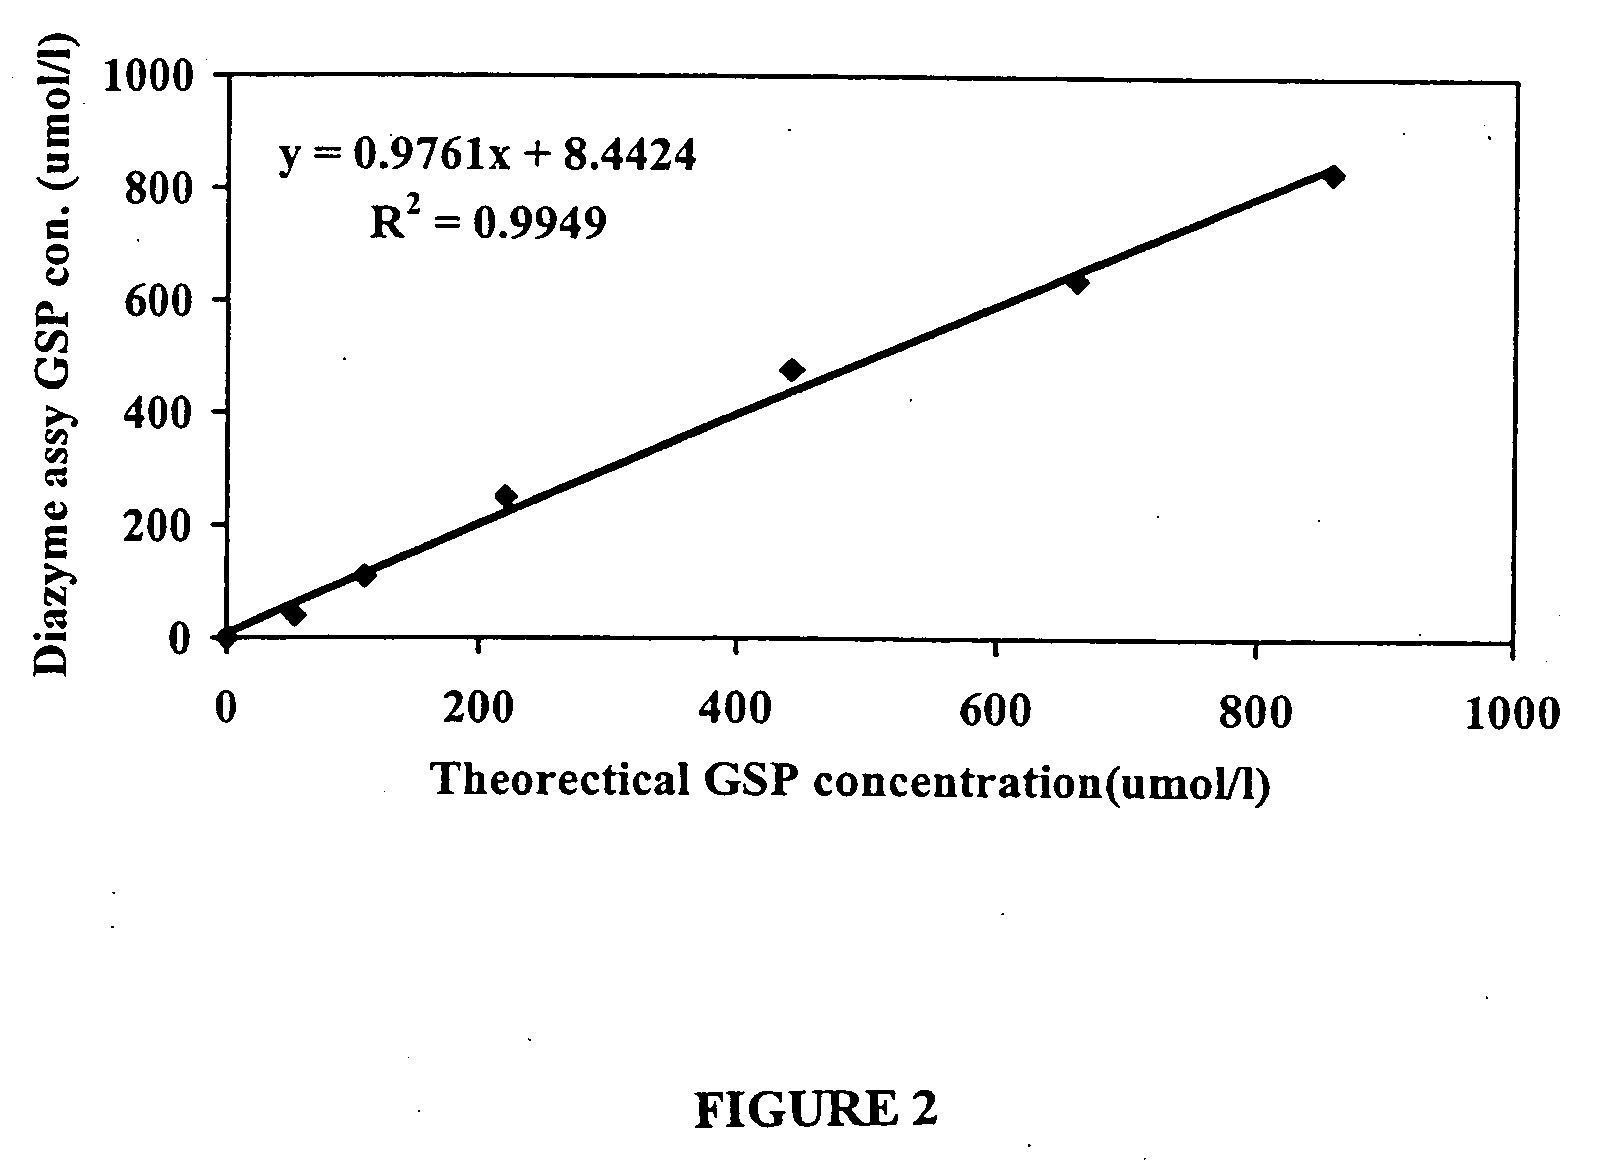 Methods and compositions for determination of glycated proteins